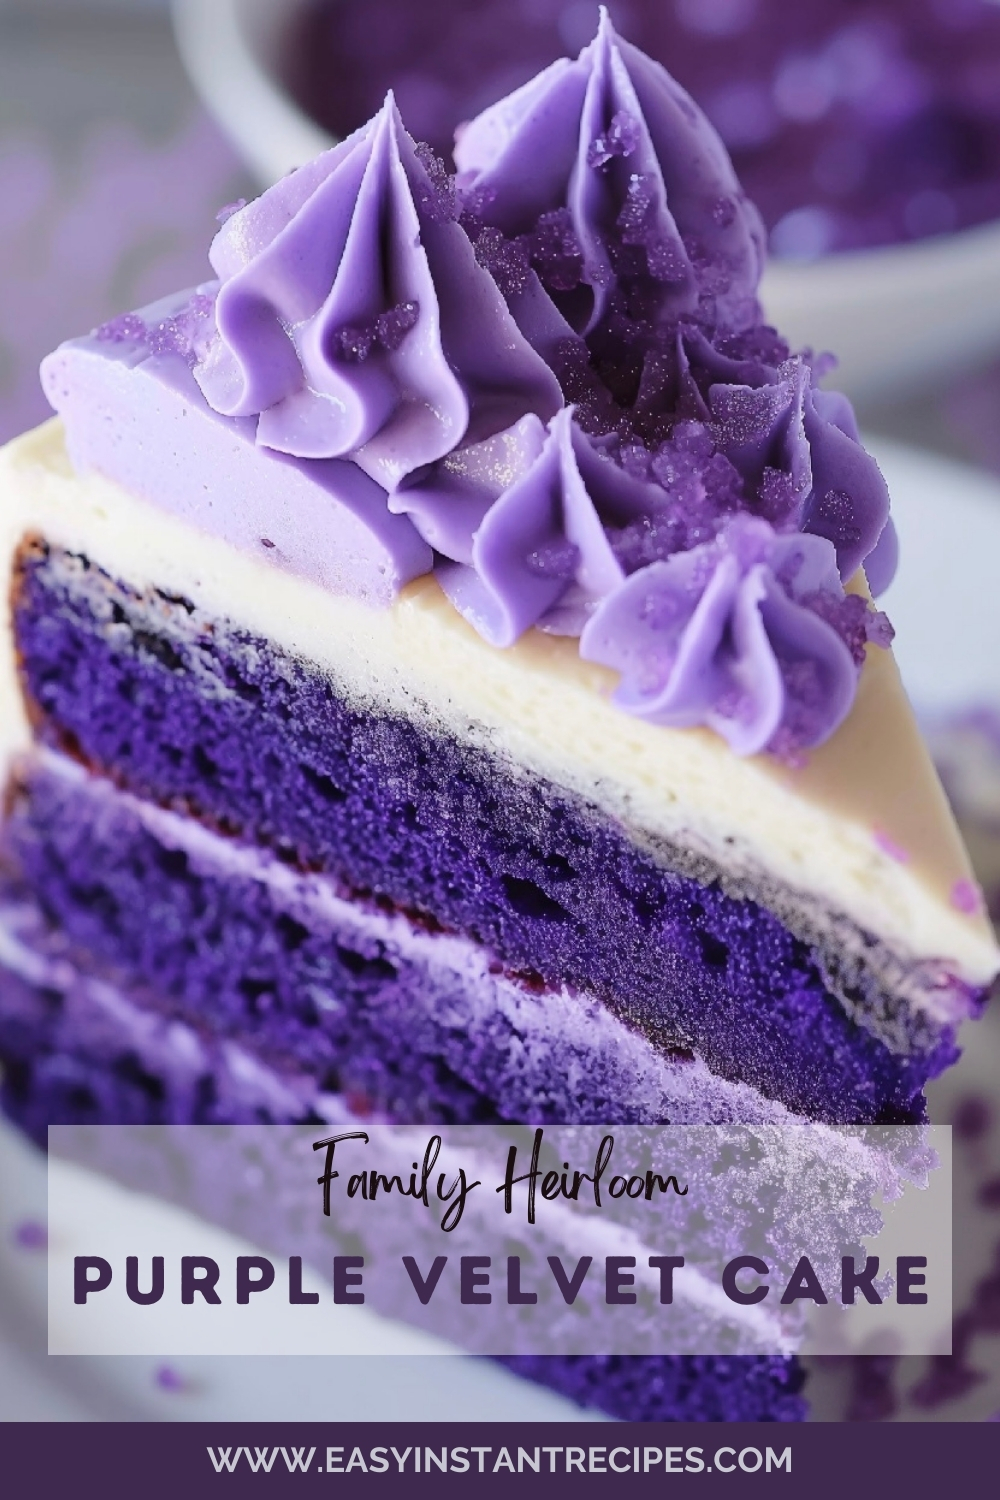 Don’t forget to pin this luxurious Purple Velvet Cake recipe!